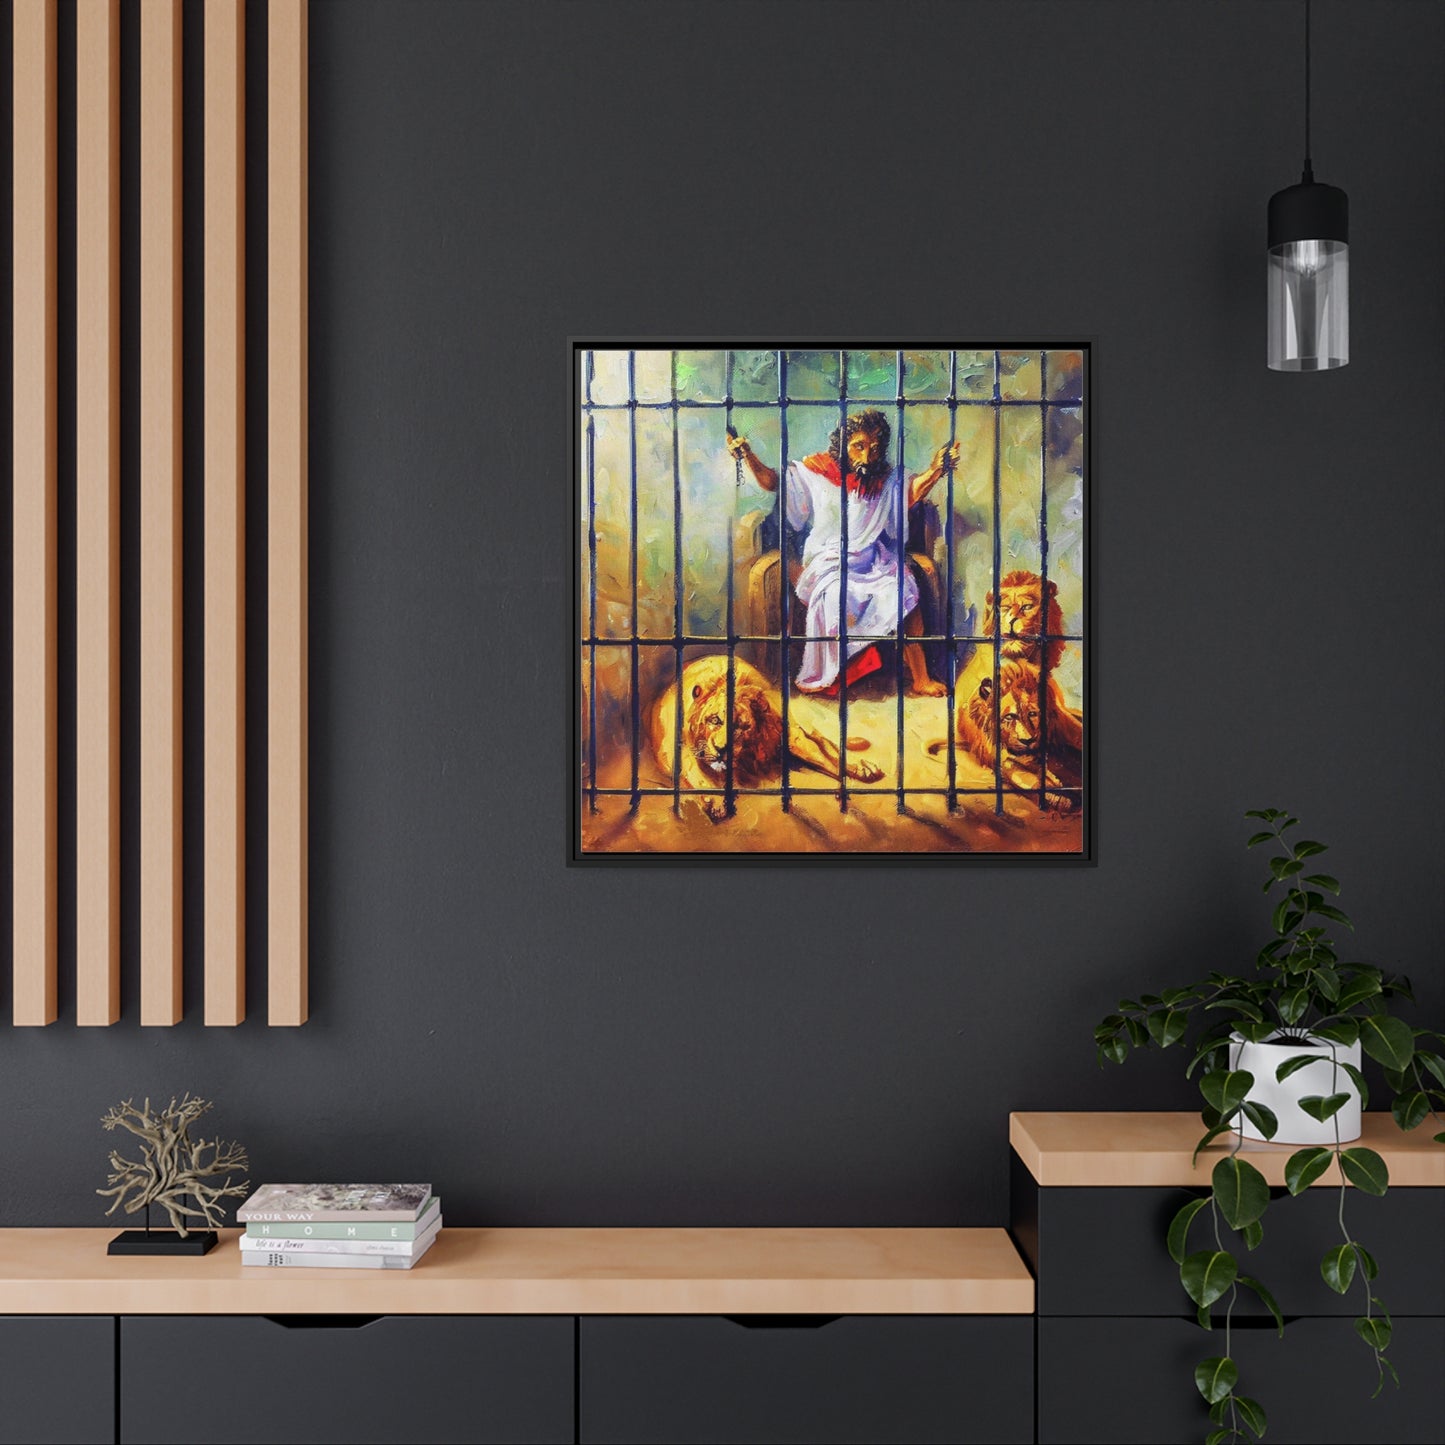 Art-of-Apparel - Daniel and the Lions - Framed Black Canvas Art Gift Items - Matte